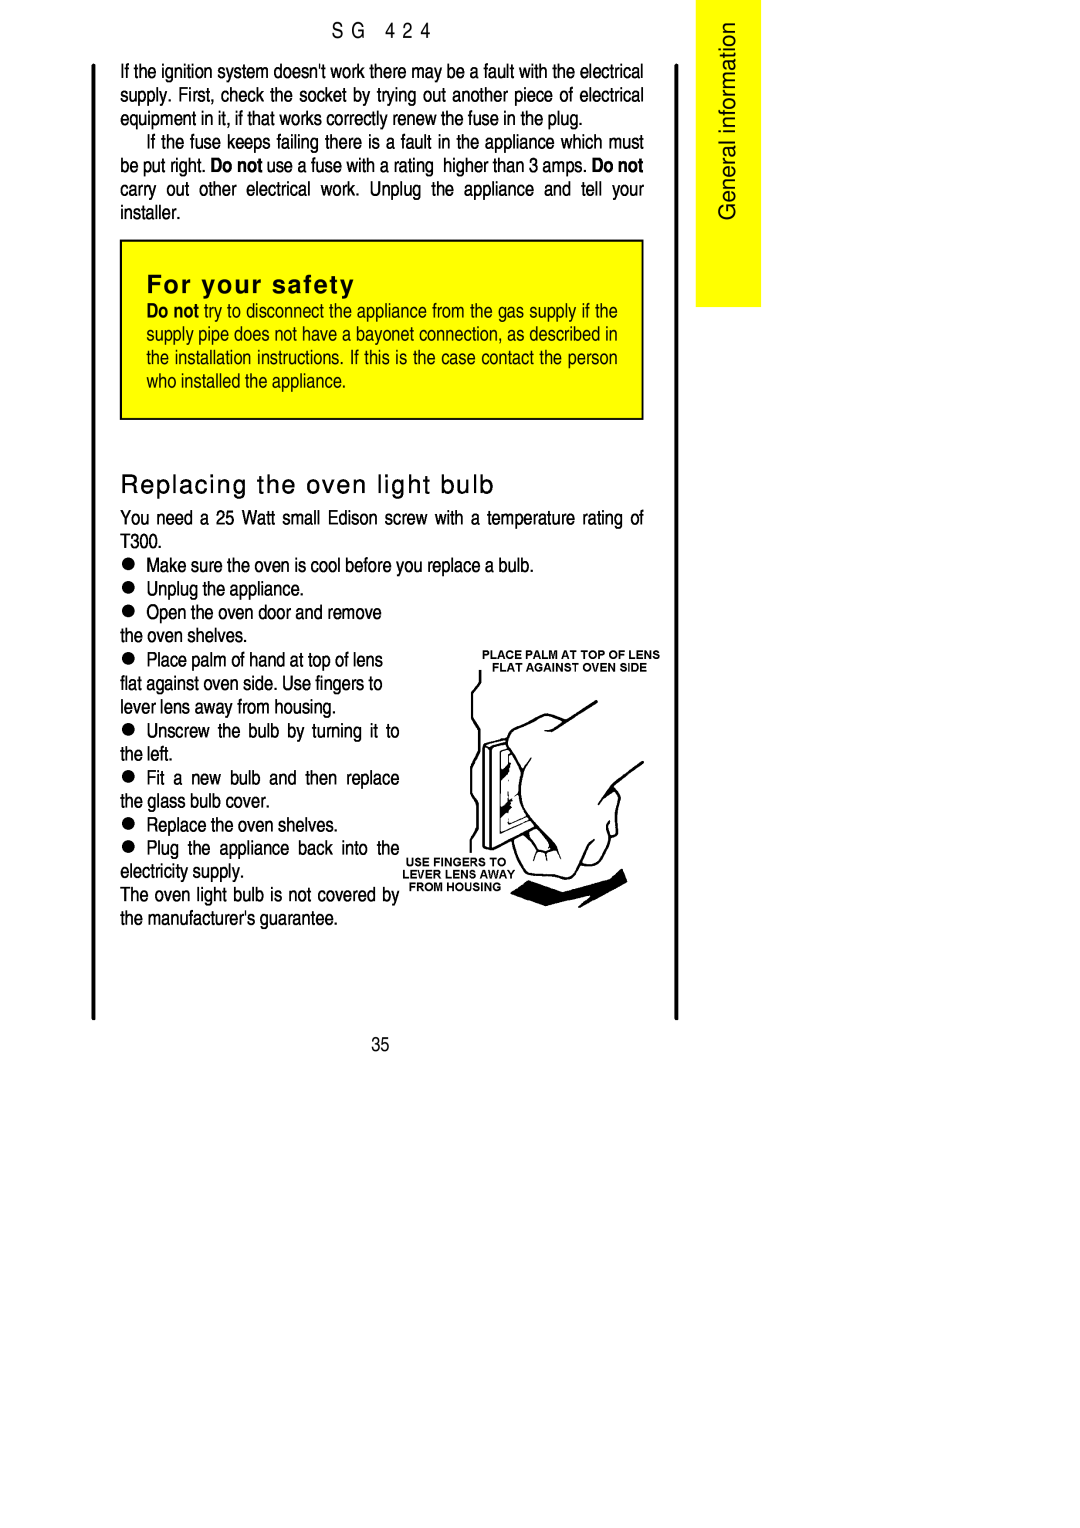 Electrolux SG 424 installation instructions Replacing the oven light bulb, For your safety, General information, S G 4 2 